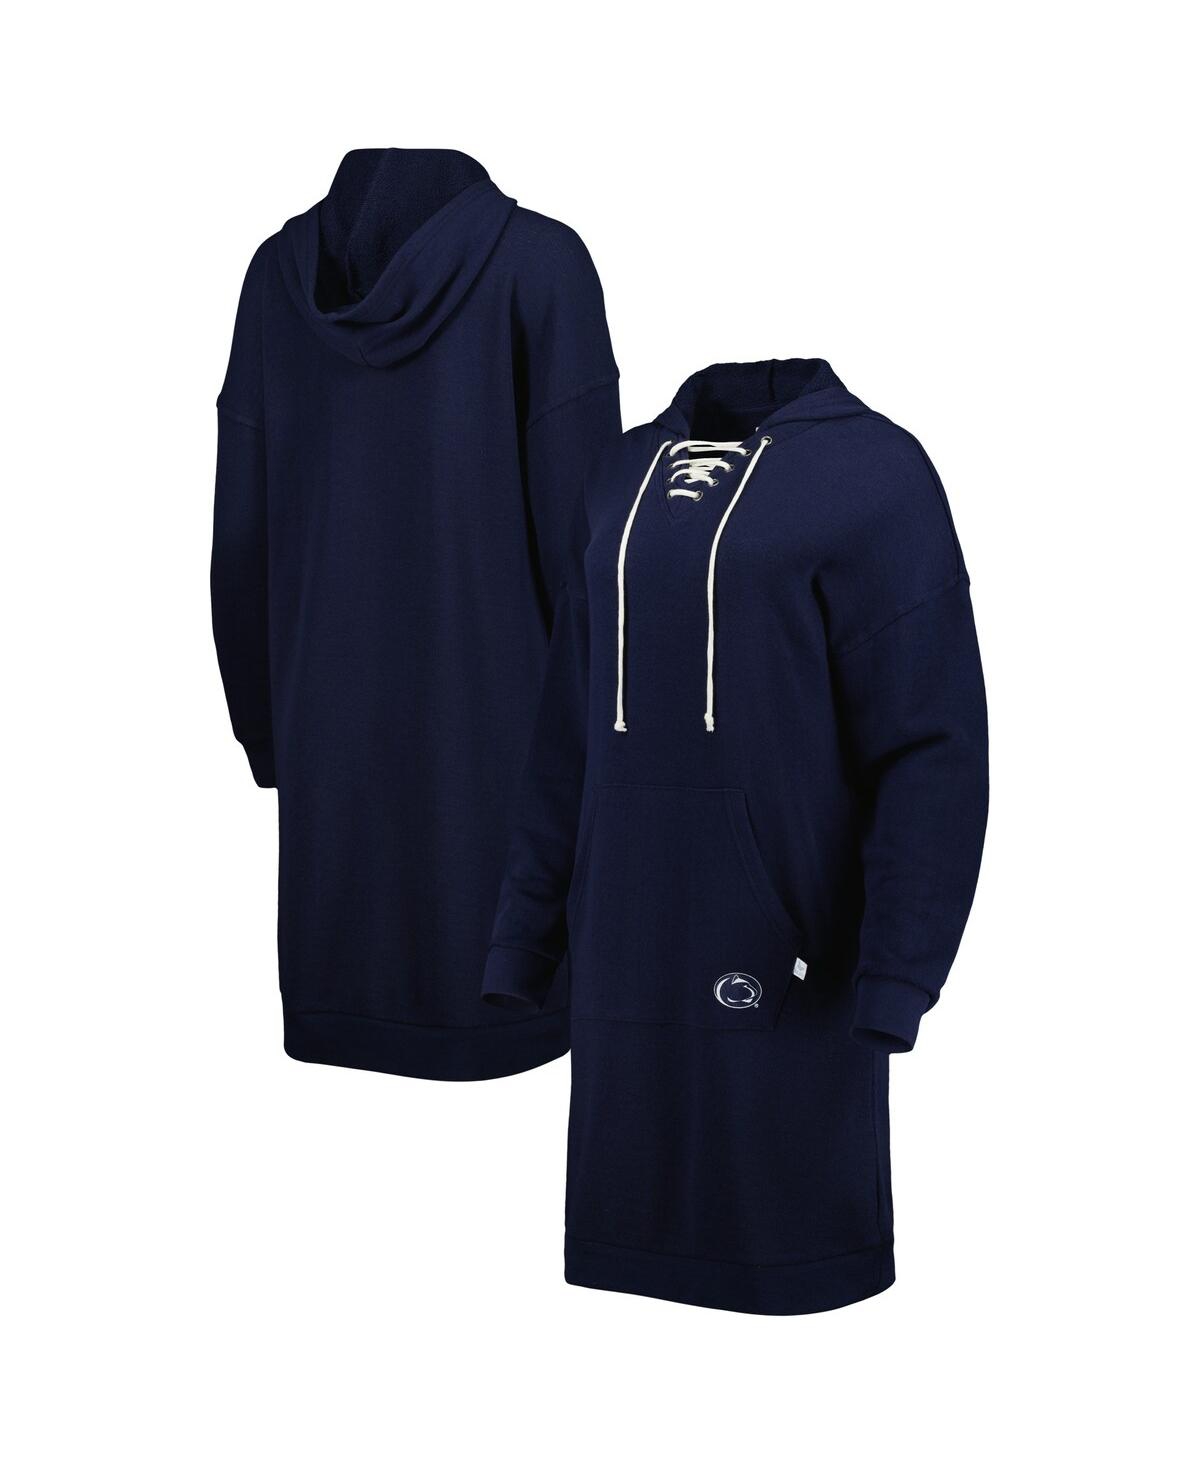 Women's Touch Navy Penn State Nittany Lions Quick Pass Lace-Up V-Neck Hoodie Dress - Navy